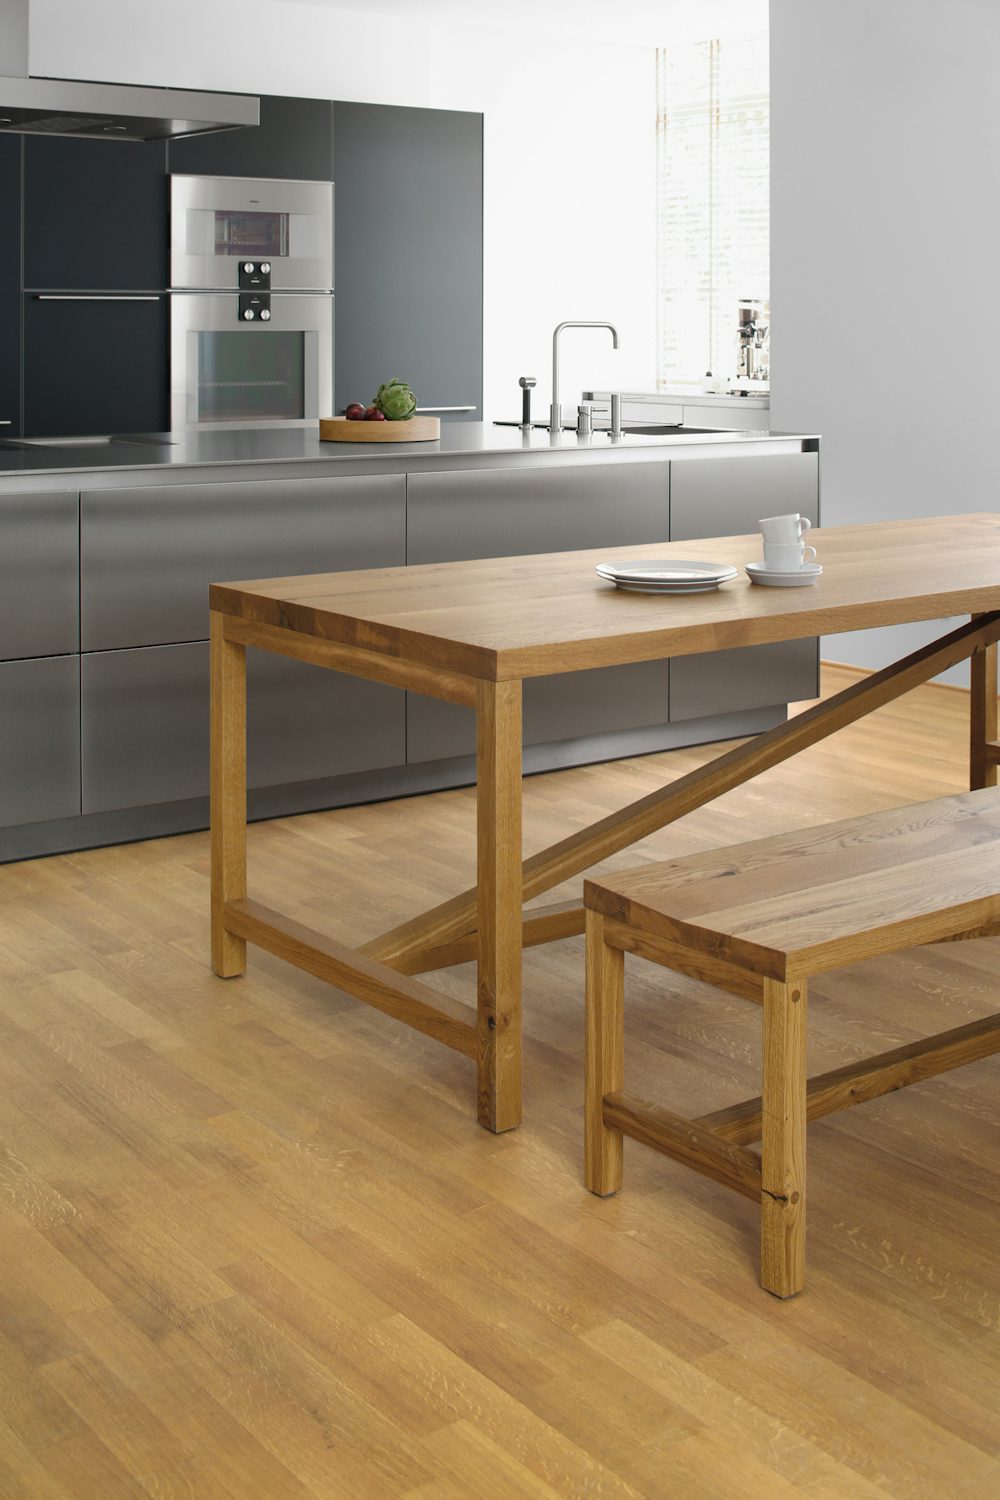 e15 sitz bench with holborn table in kitchen